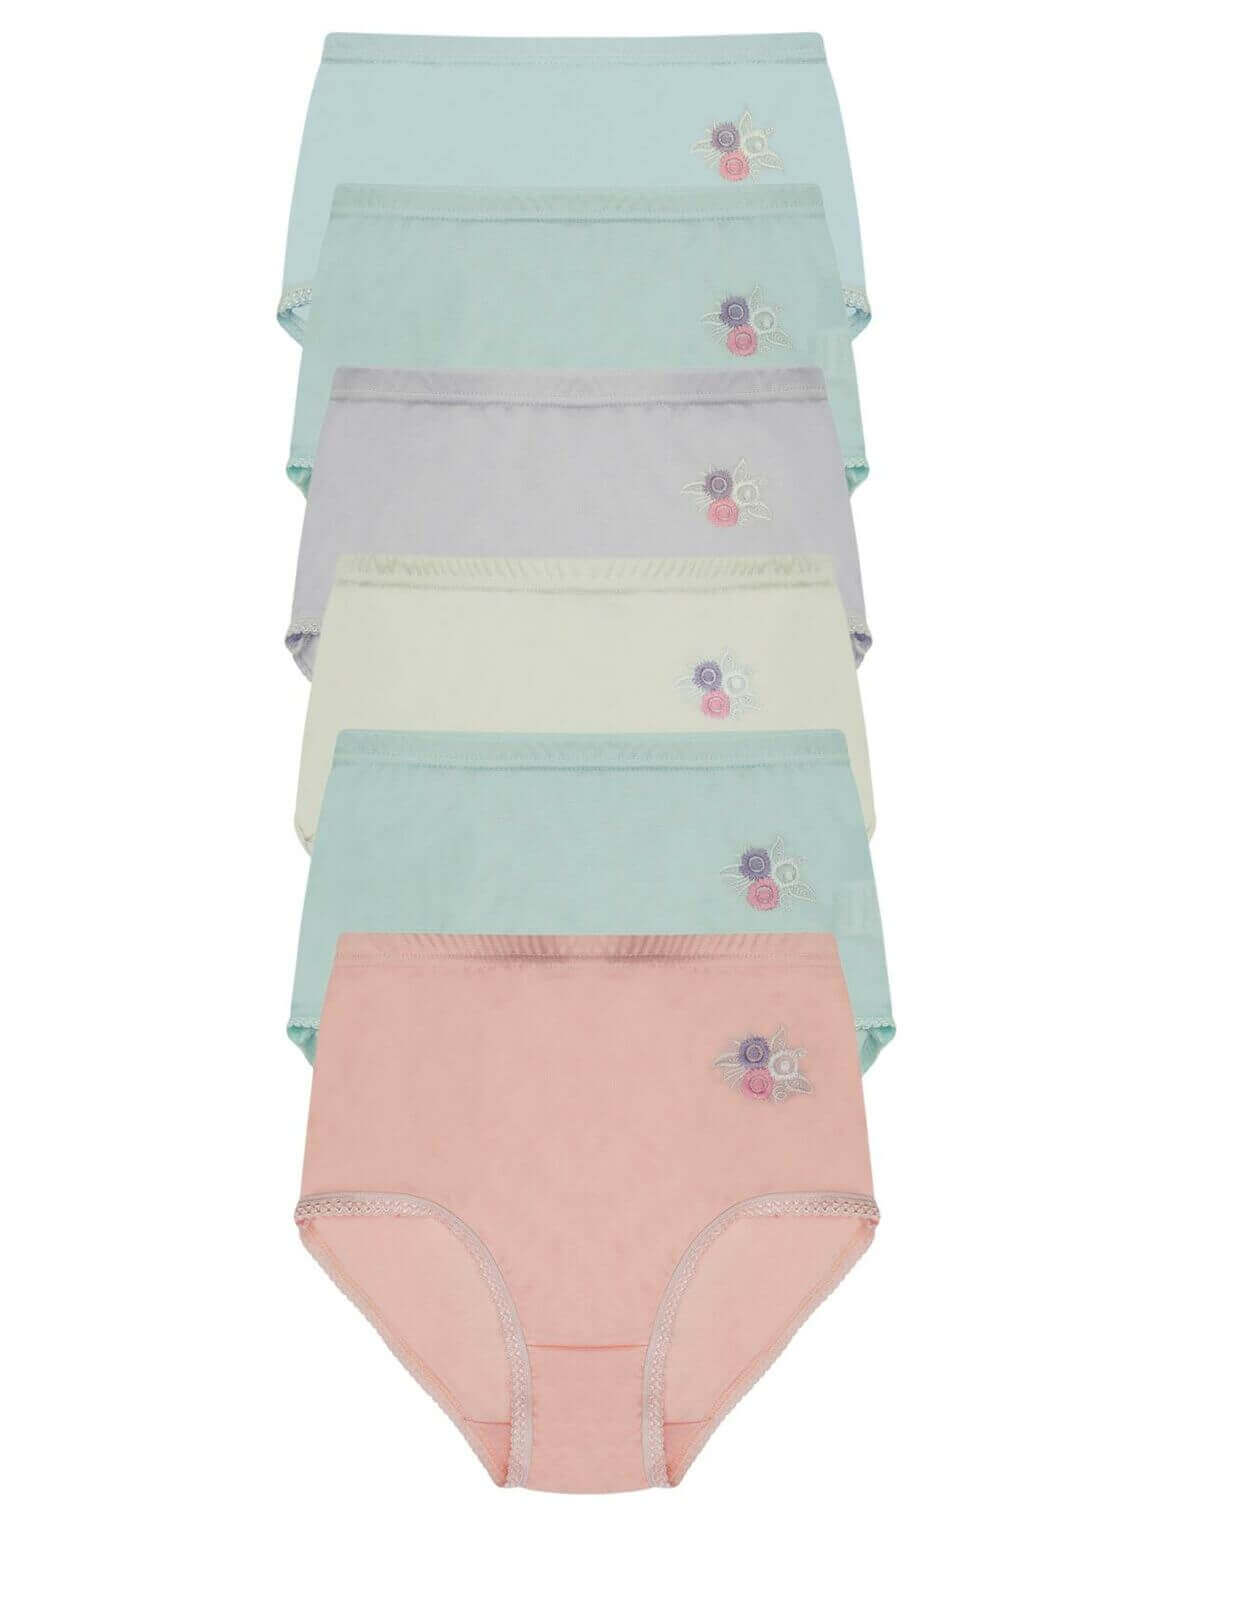 Pack Of 6 Women's Embroidered Full Briefs Maxi Underwear. Buy now for £11.00. A Underwear by Daisy Dreamer. 10-12, 14-16, 18-20, 22-24, 24-26, 28-30, 32-34, briefs, comfortable, daisy dreamer, duck egg, elasticated, girls, lilac, lingerie, maxi, Out of st